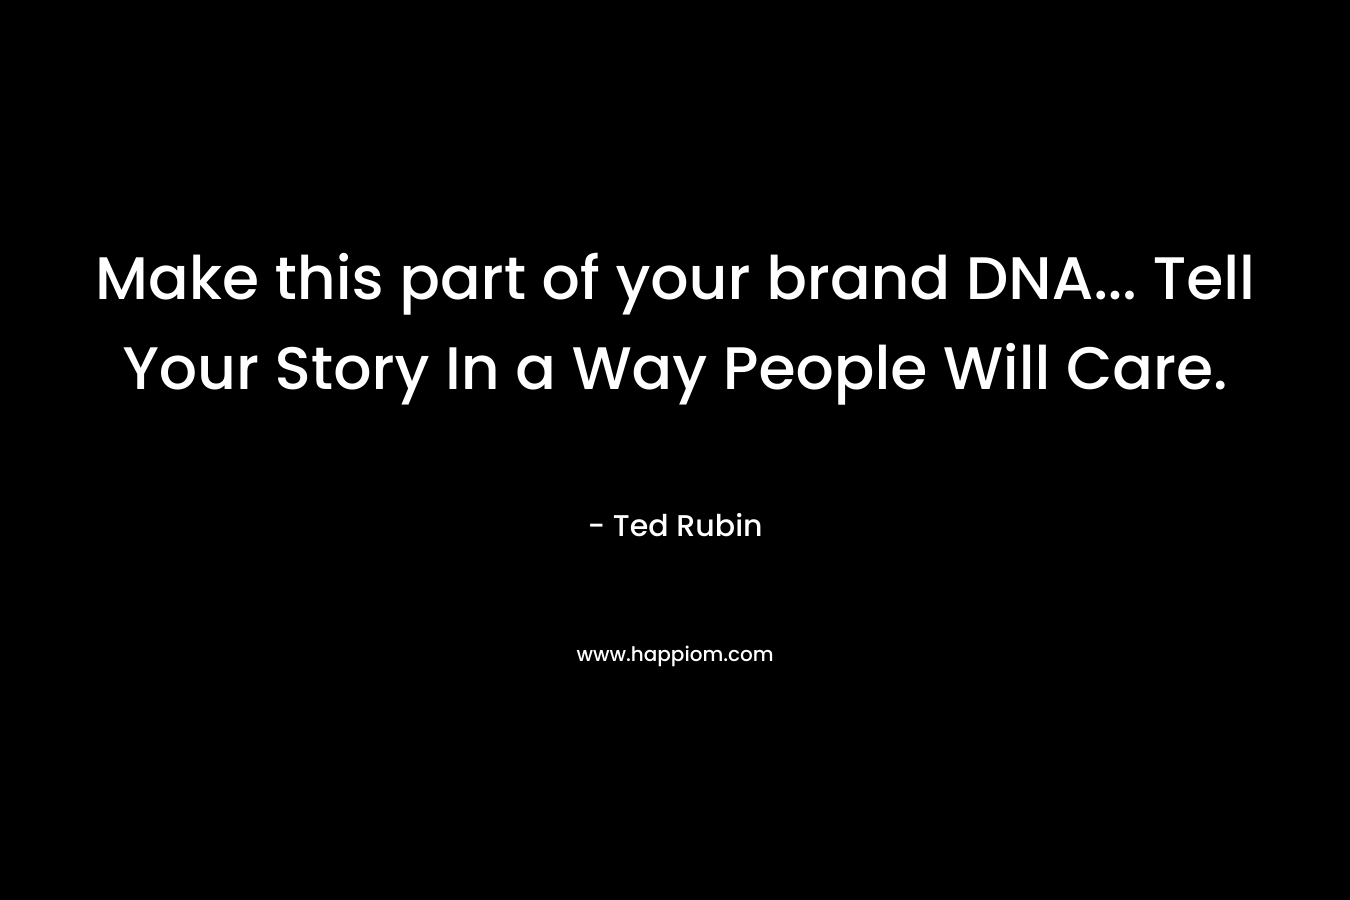 Make this part of your brand DNA... Tell Your Story In a Way People Will Care.